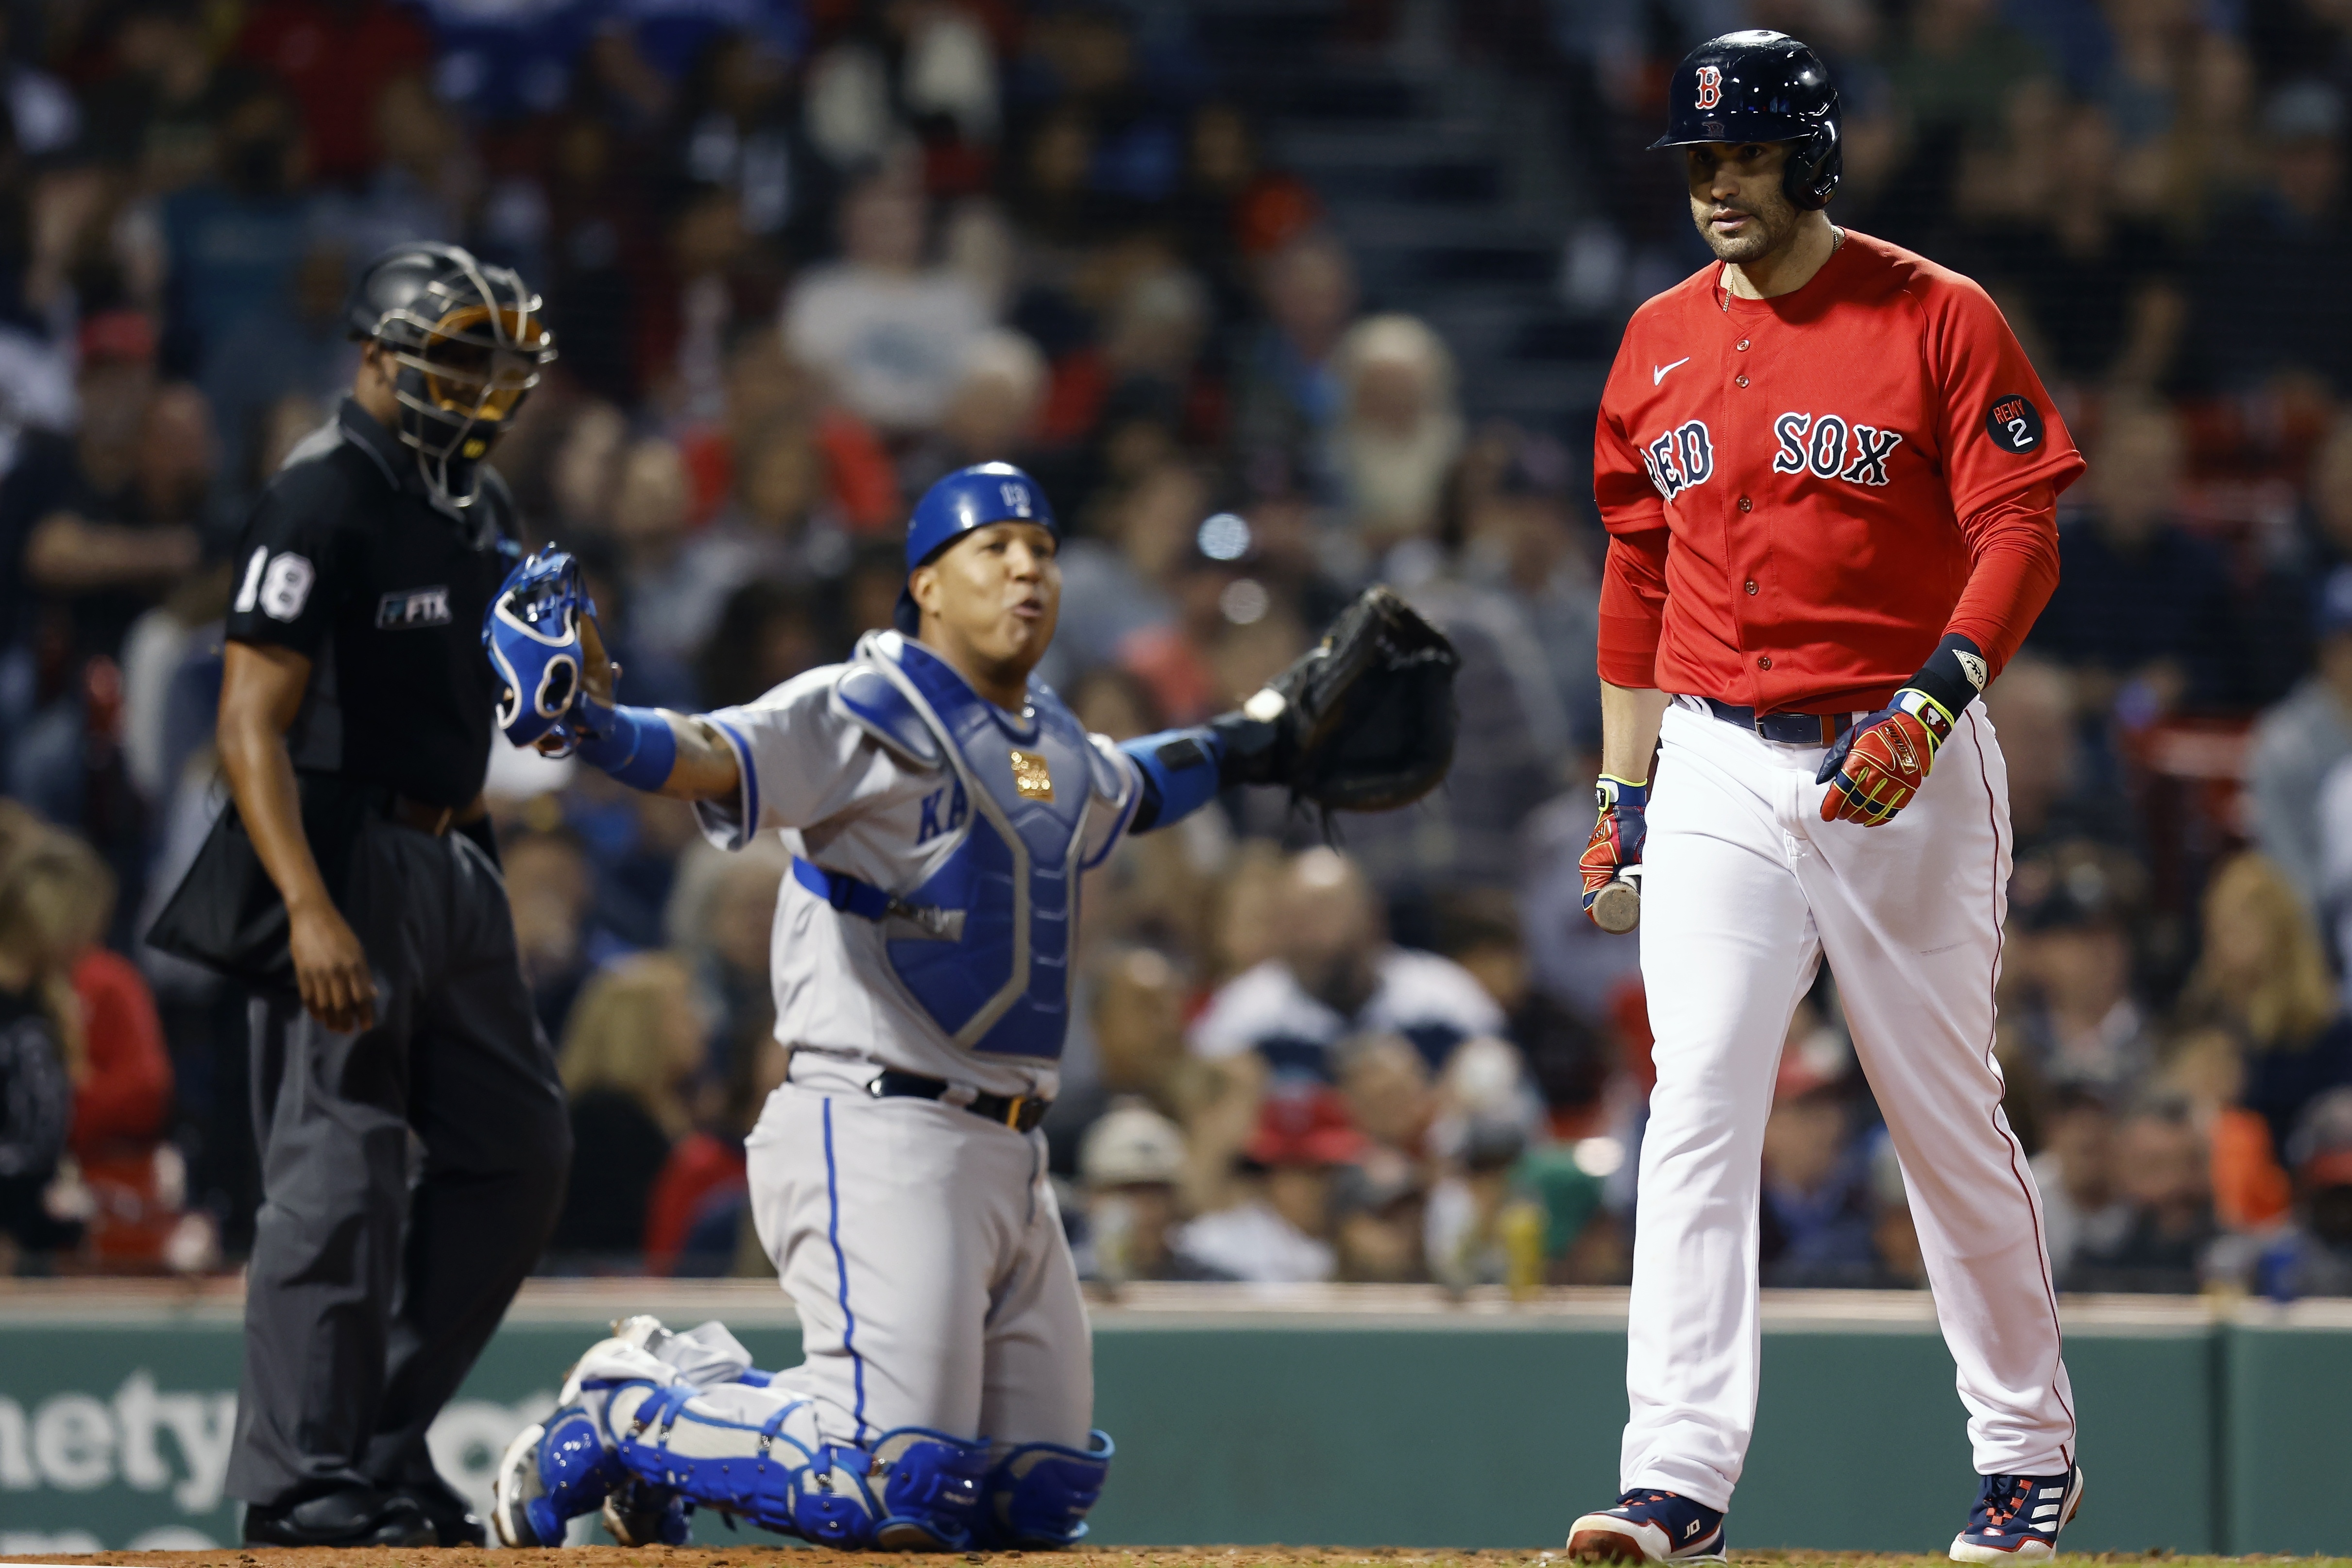 Martinez drives in 4 as Red Sox top Royals for 5th straight win